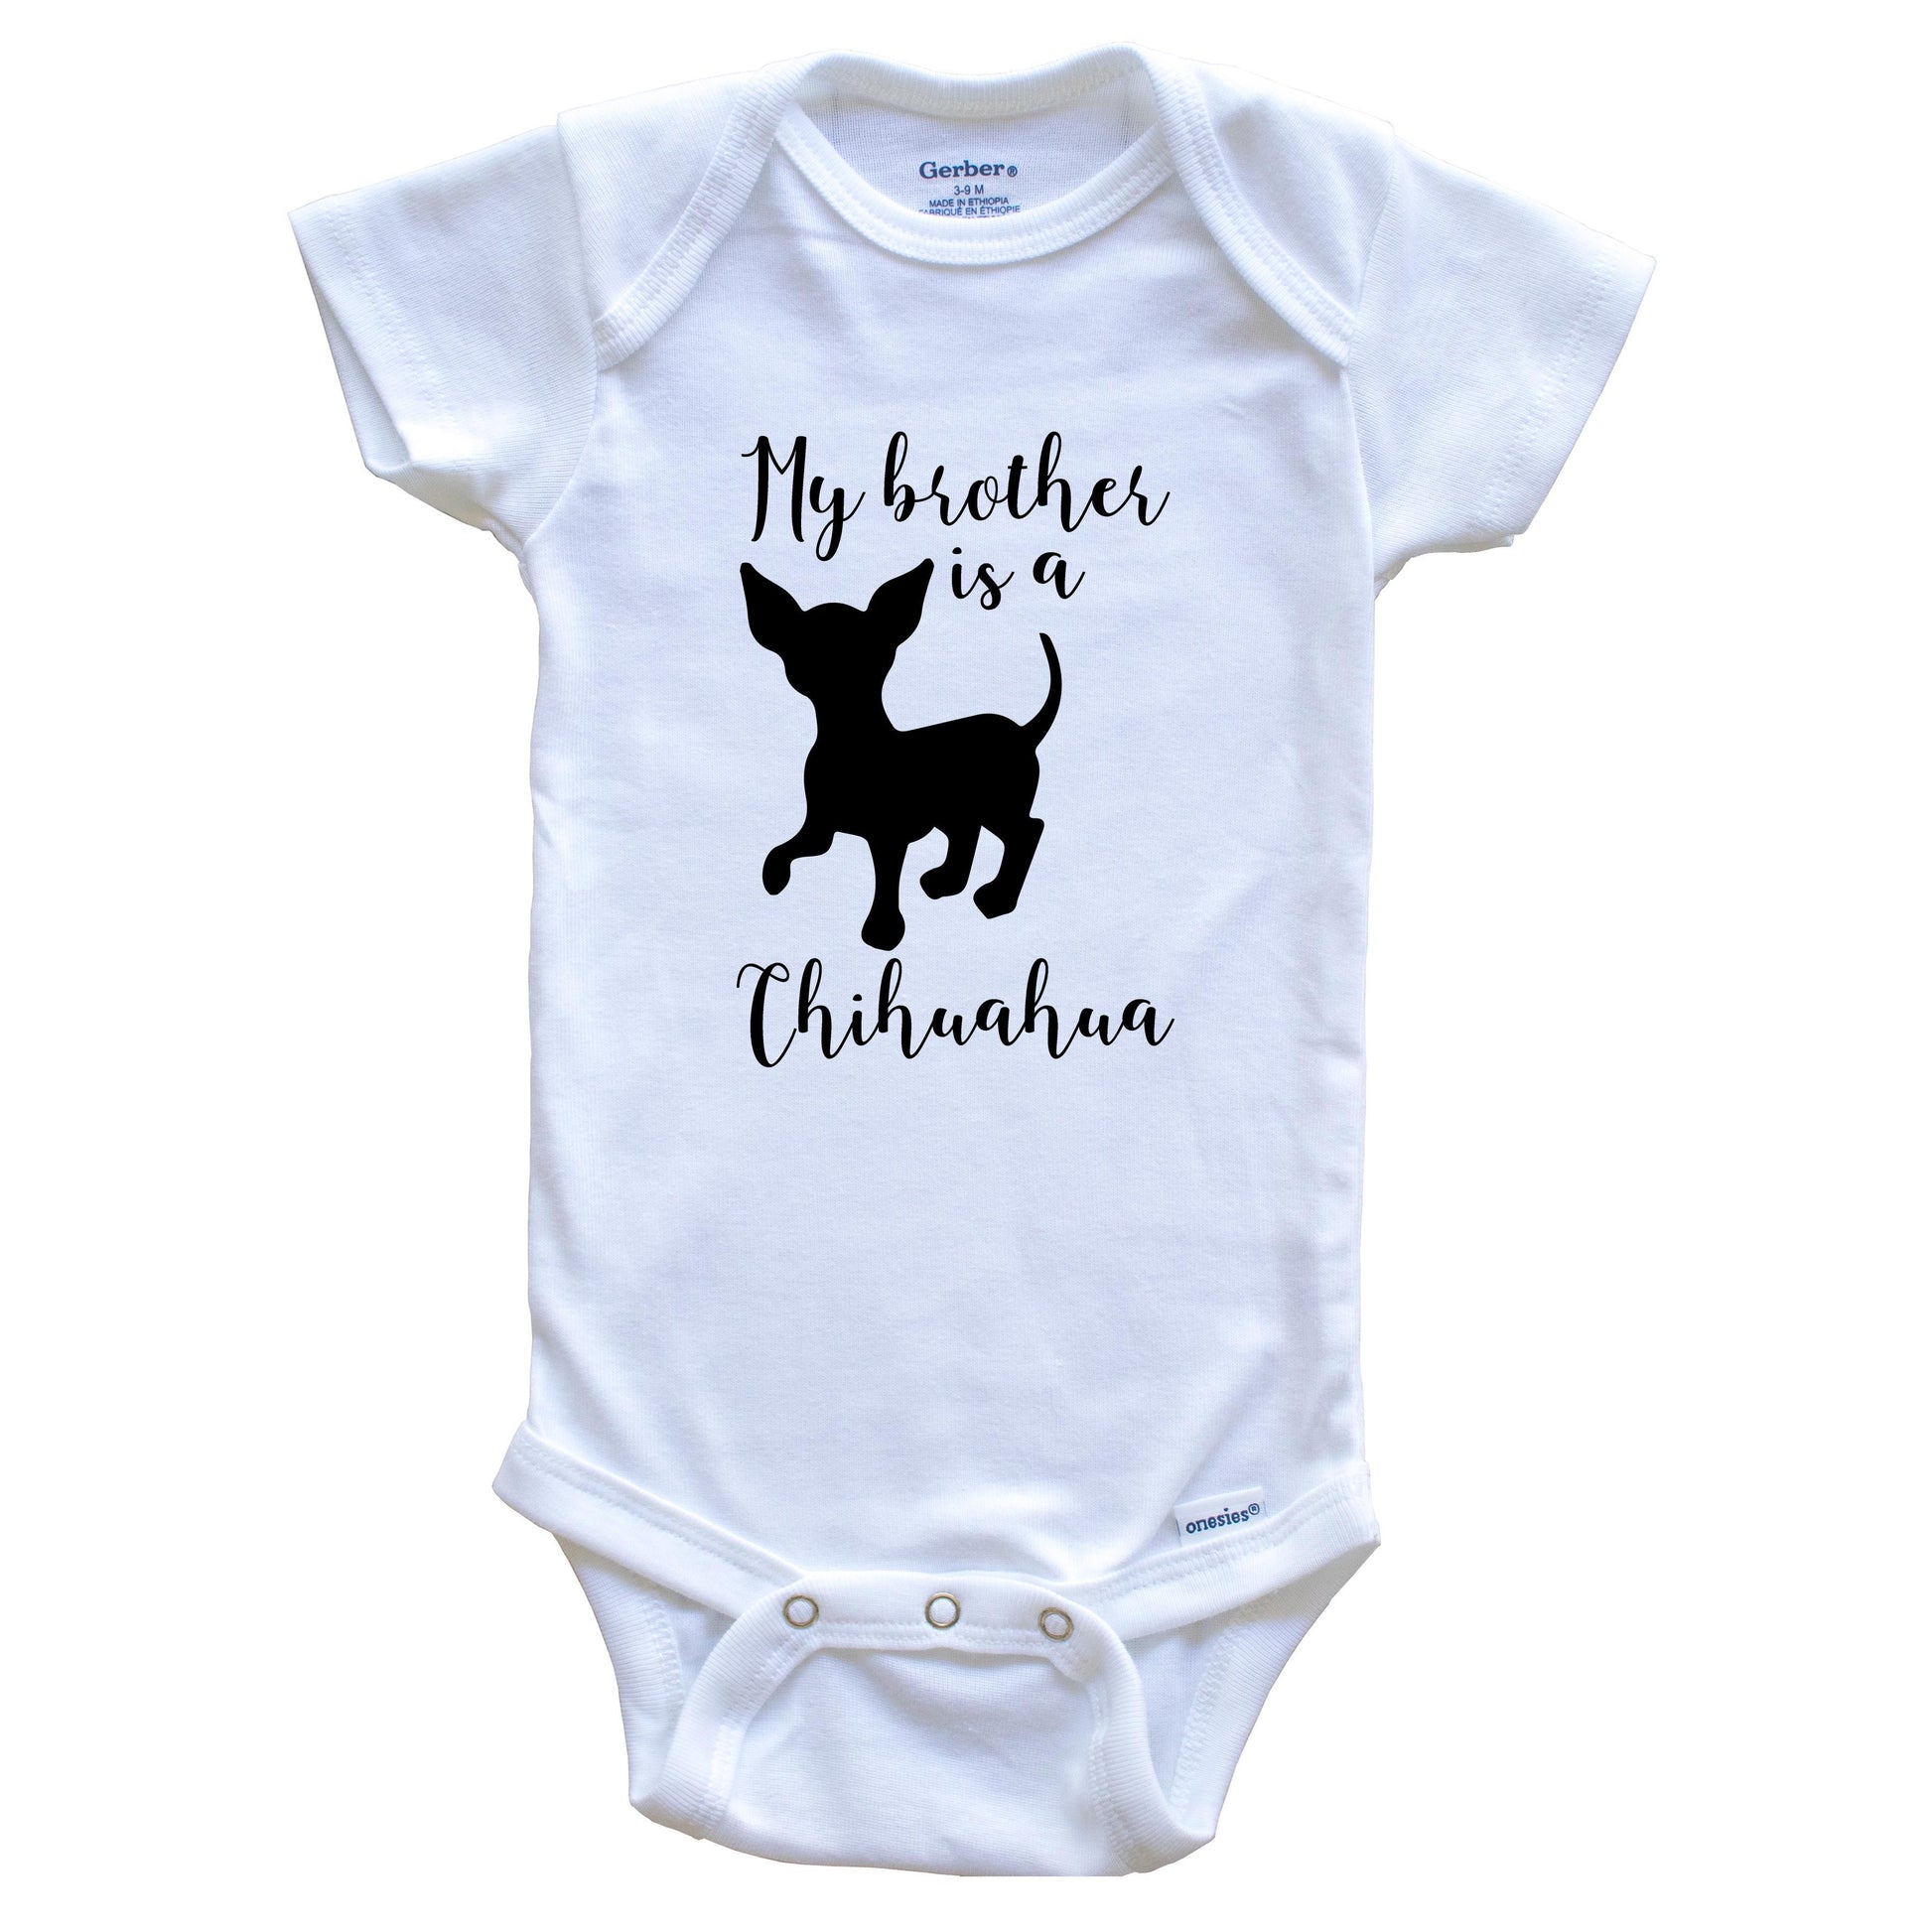 My Brother Is A Chihuahua Cute Dog Baby Onesie - Chihuahua One Piece Baby Bodysuit